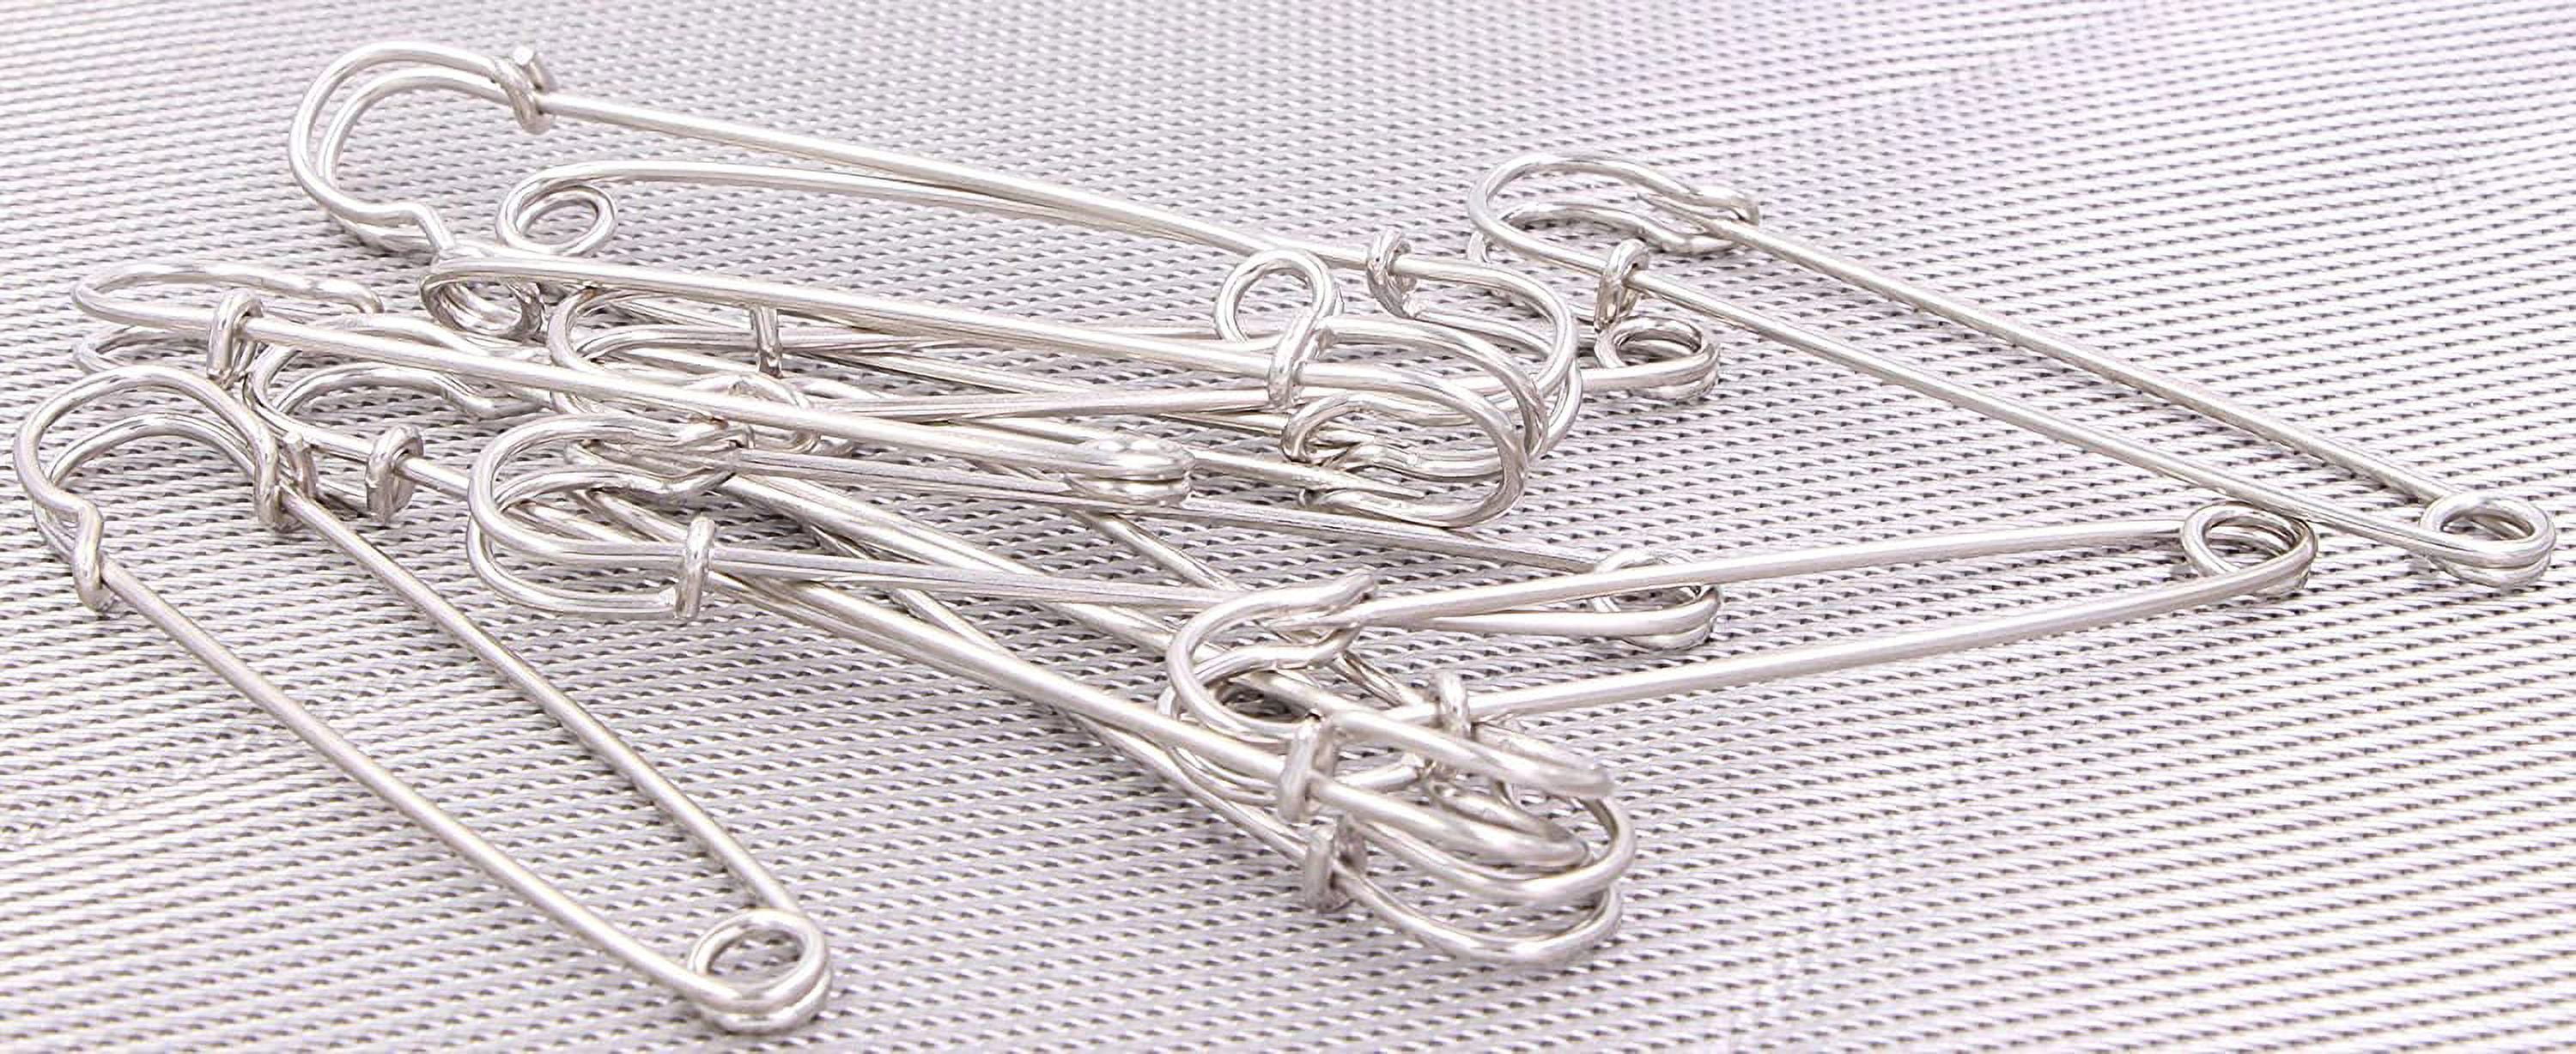 12pcs/set Large Heavy Duty Stainless Steel Big Jumbo Safety Pin Blanket  Crafting for Blankets Crafts Leather Wool Canvas - AliExpress